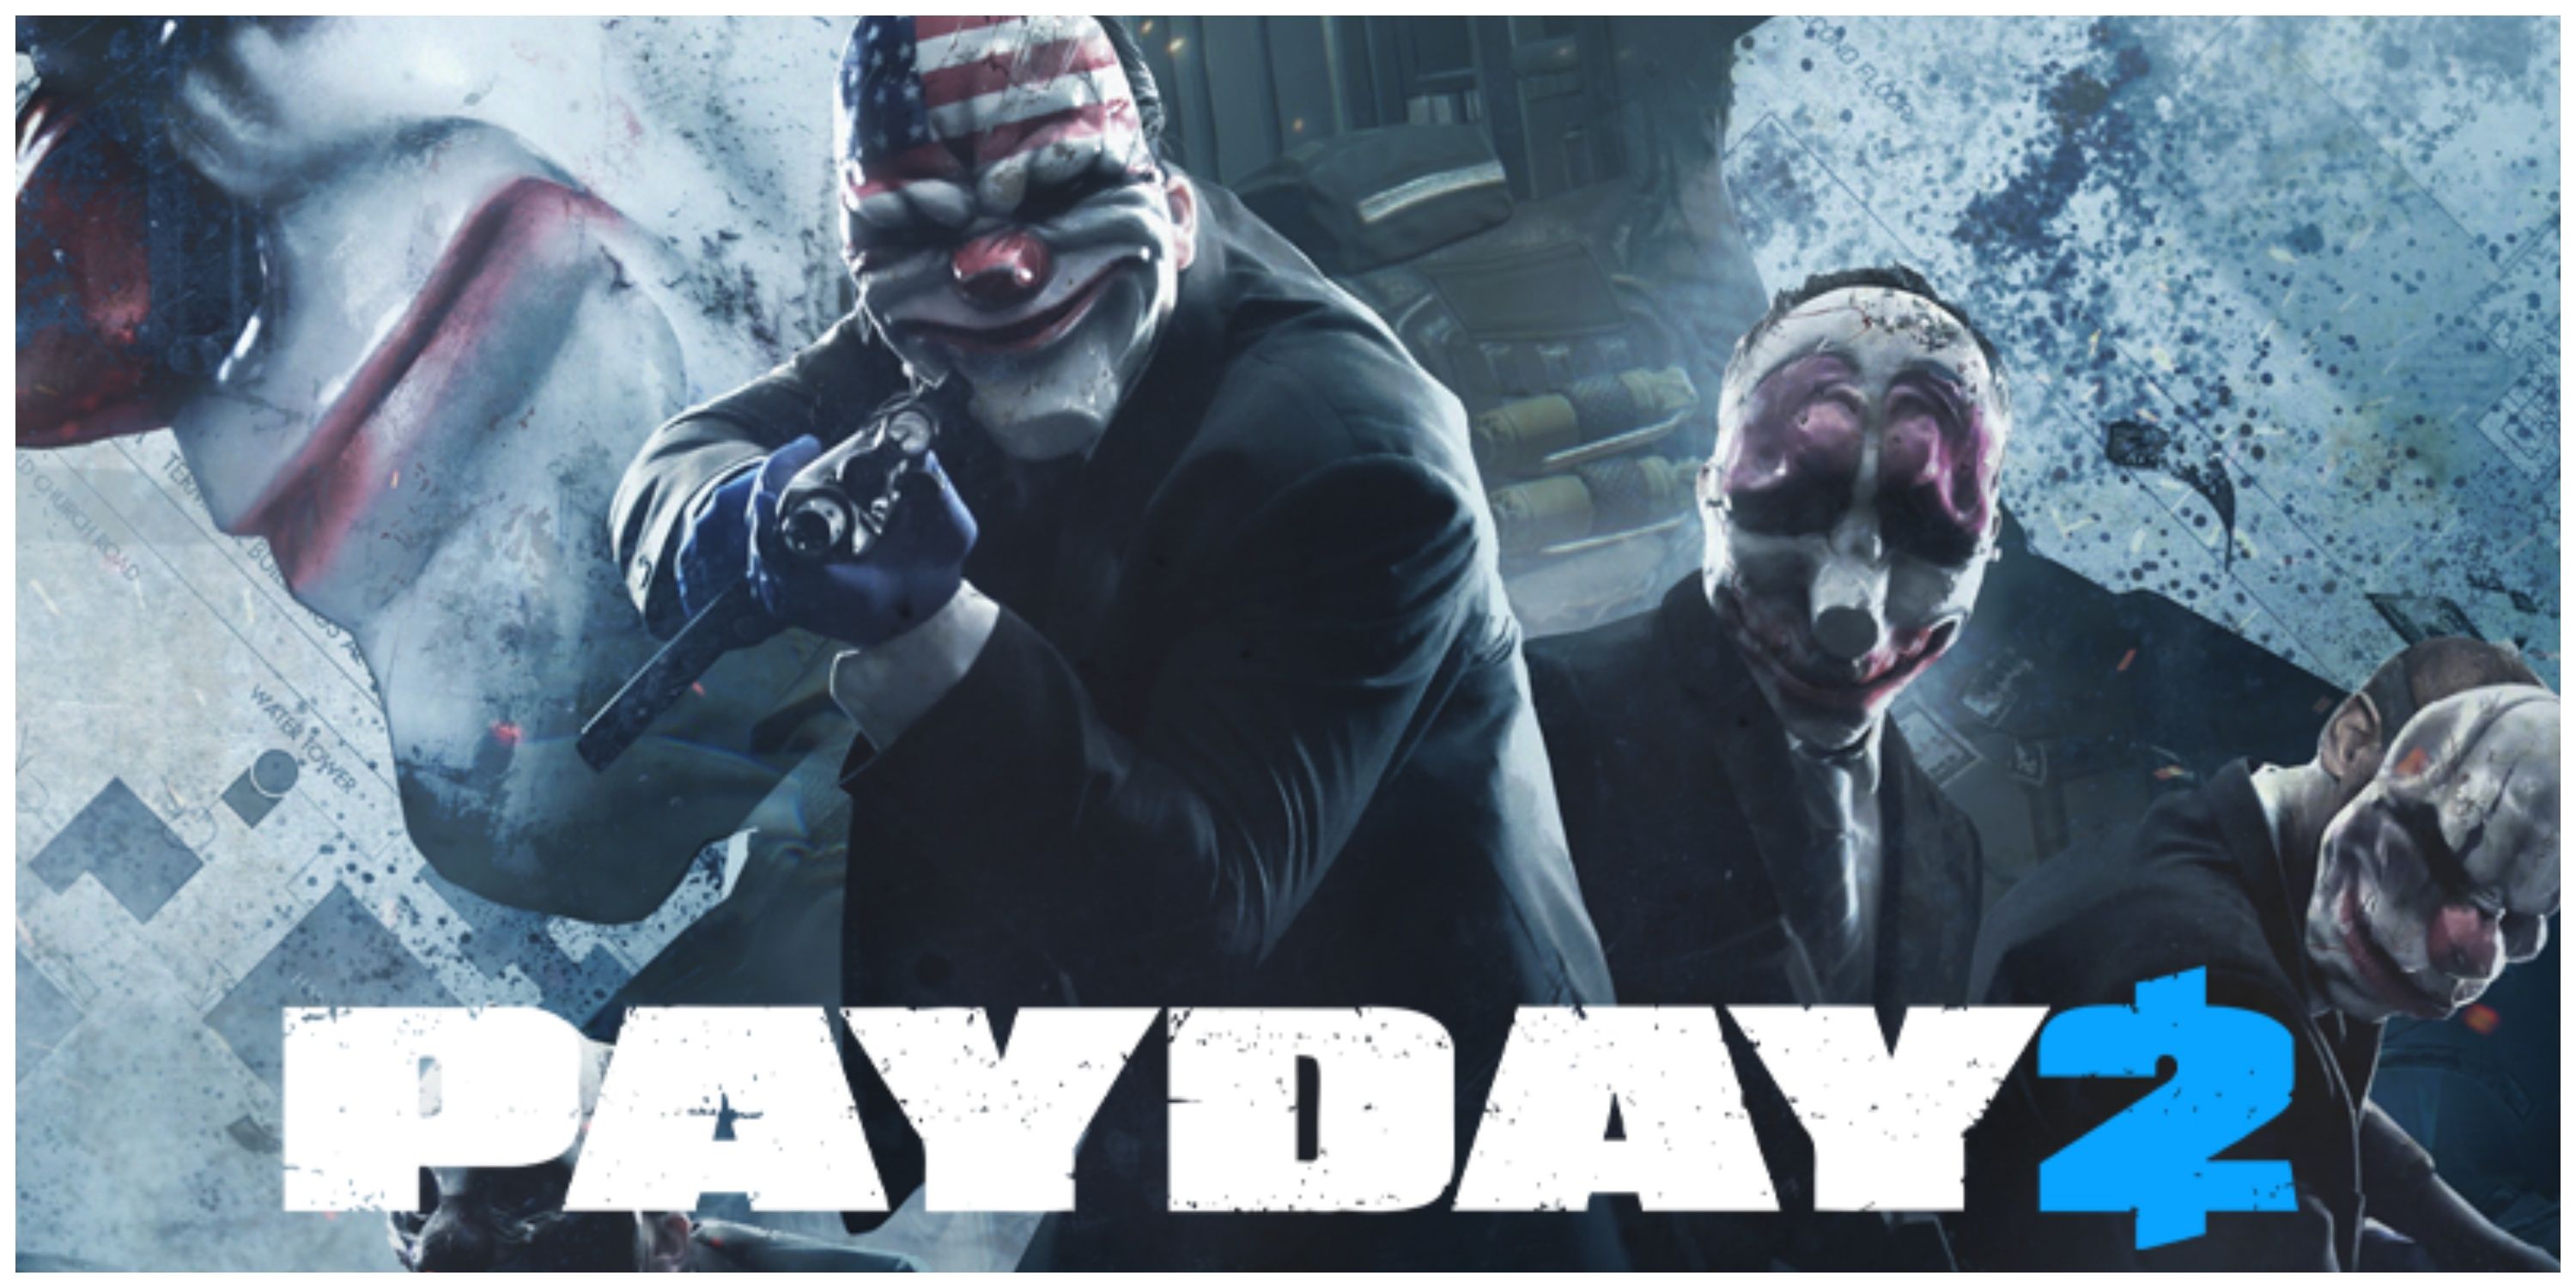 Payday 2 title art